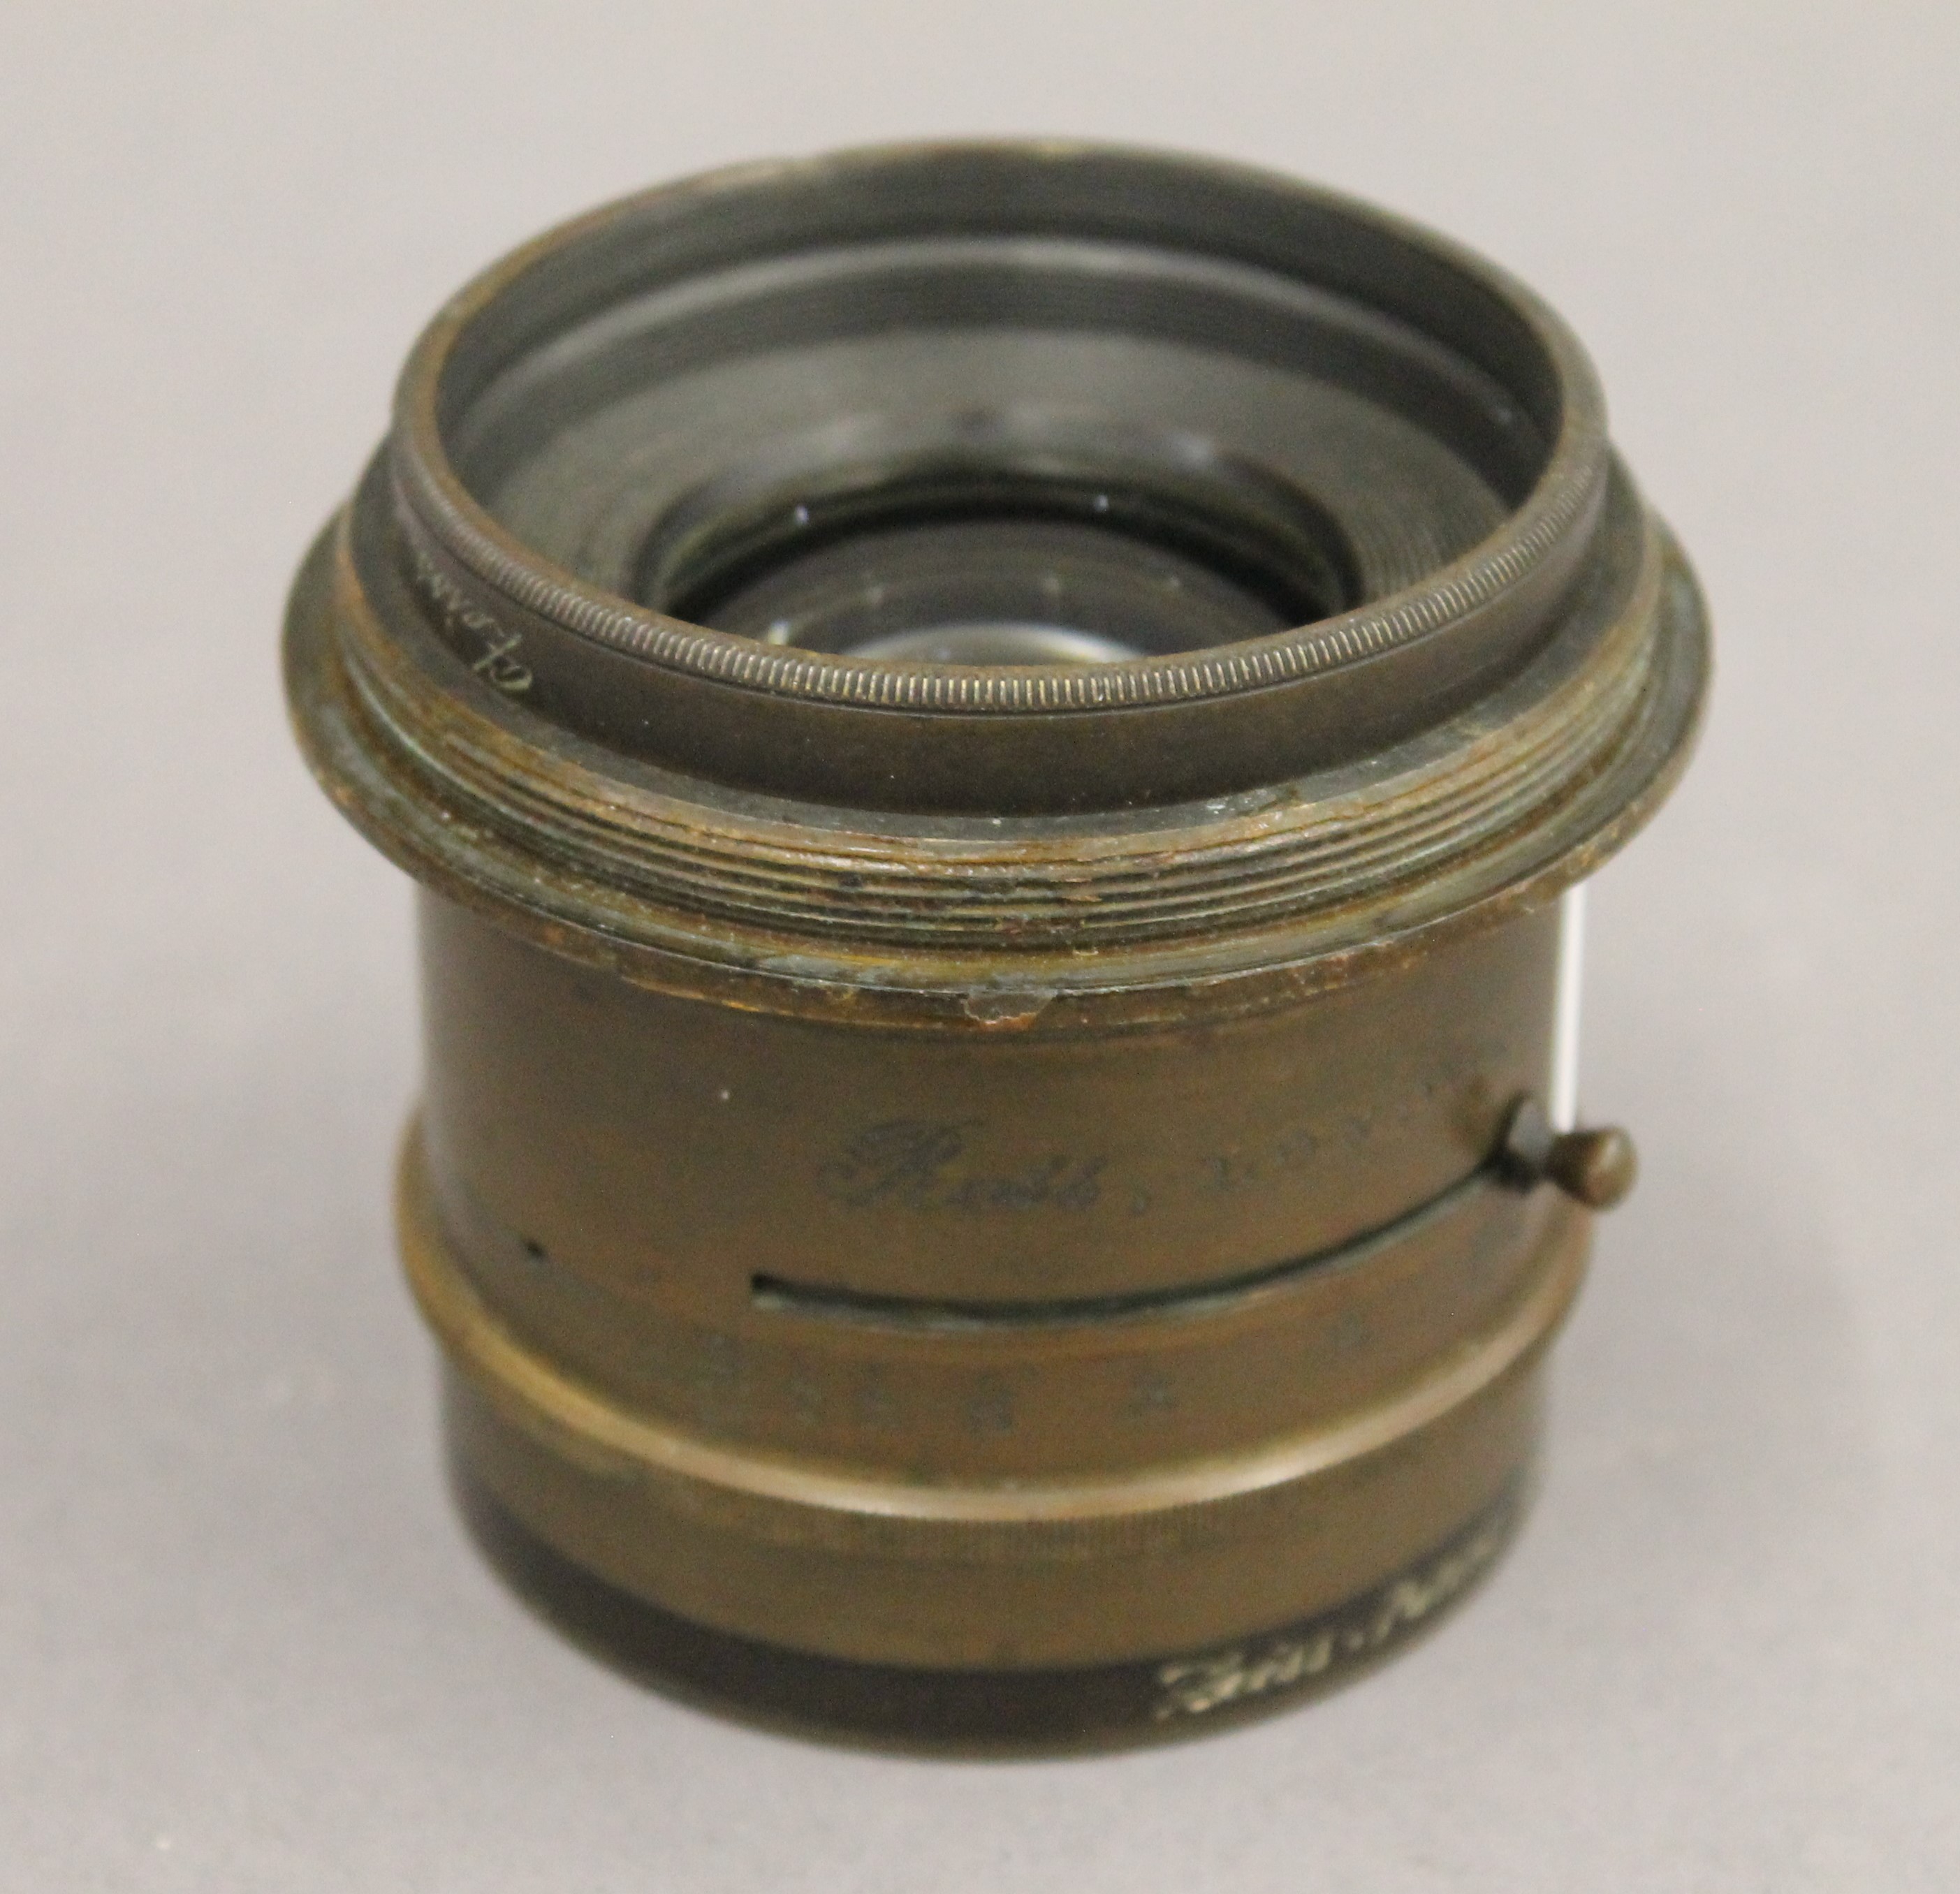 A Zeiss patent 16.5 in convertible anastigment by Ross camera lens. 6.5 cm high.